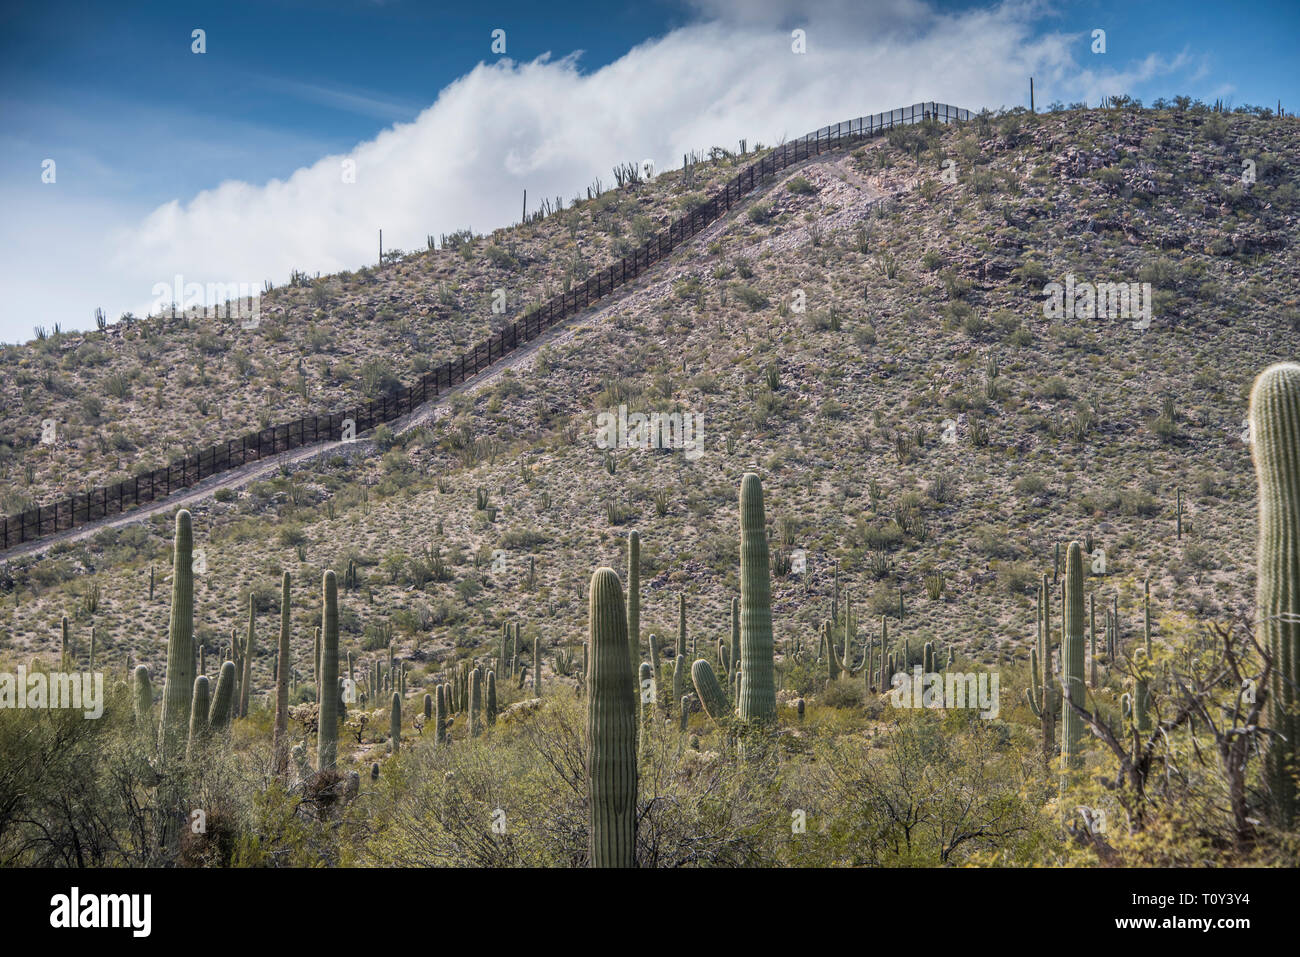 Border Wall between USA and Mexico climbs up a hill between Lukeville, Arizona, USA and Sonoyta, Sonora, Mexico. Saguaro cactus in foreground. Stock Photo